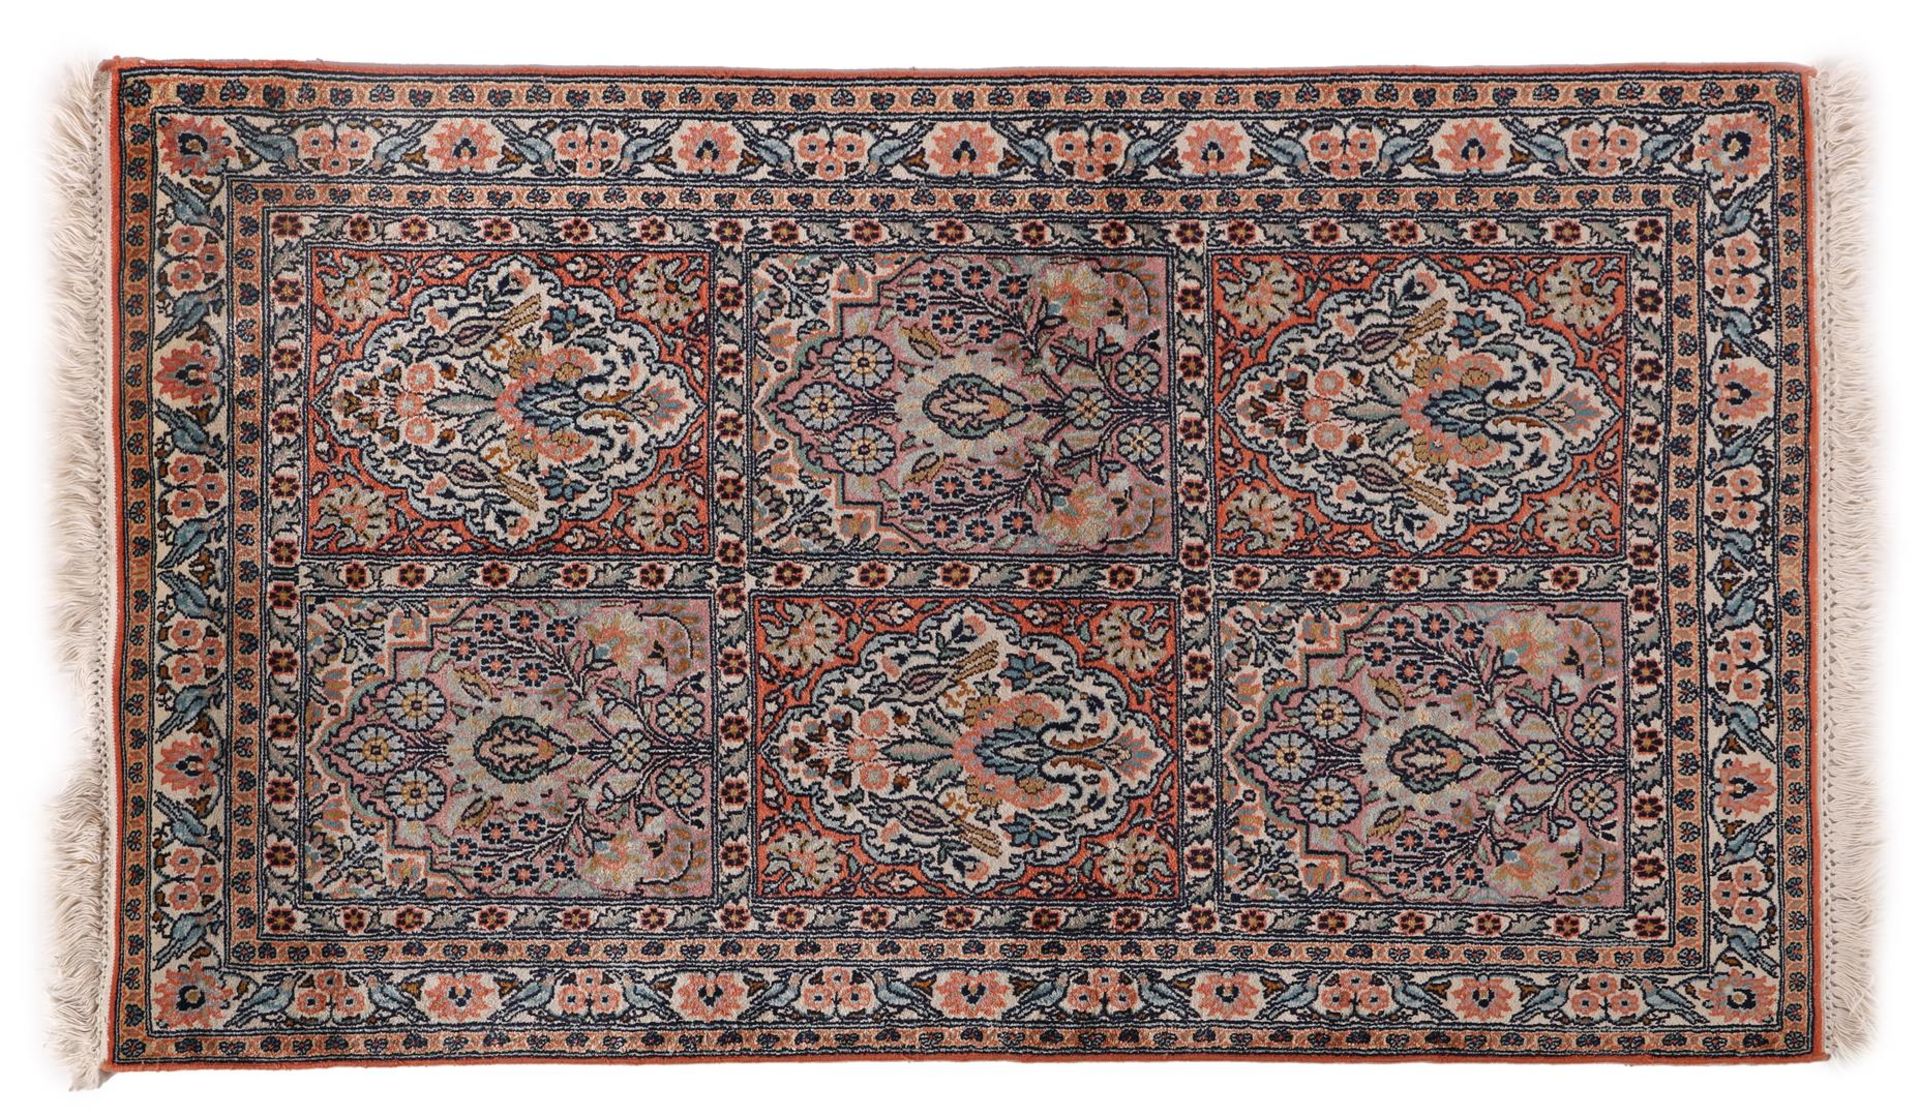 Hand-knotted oriental carpet, Kashmir India